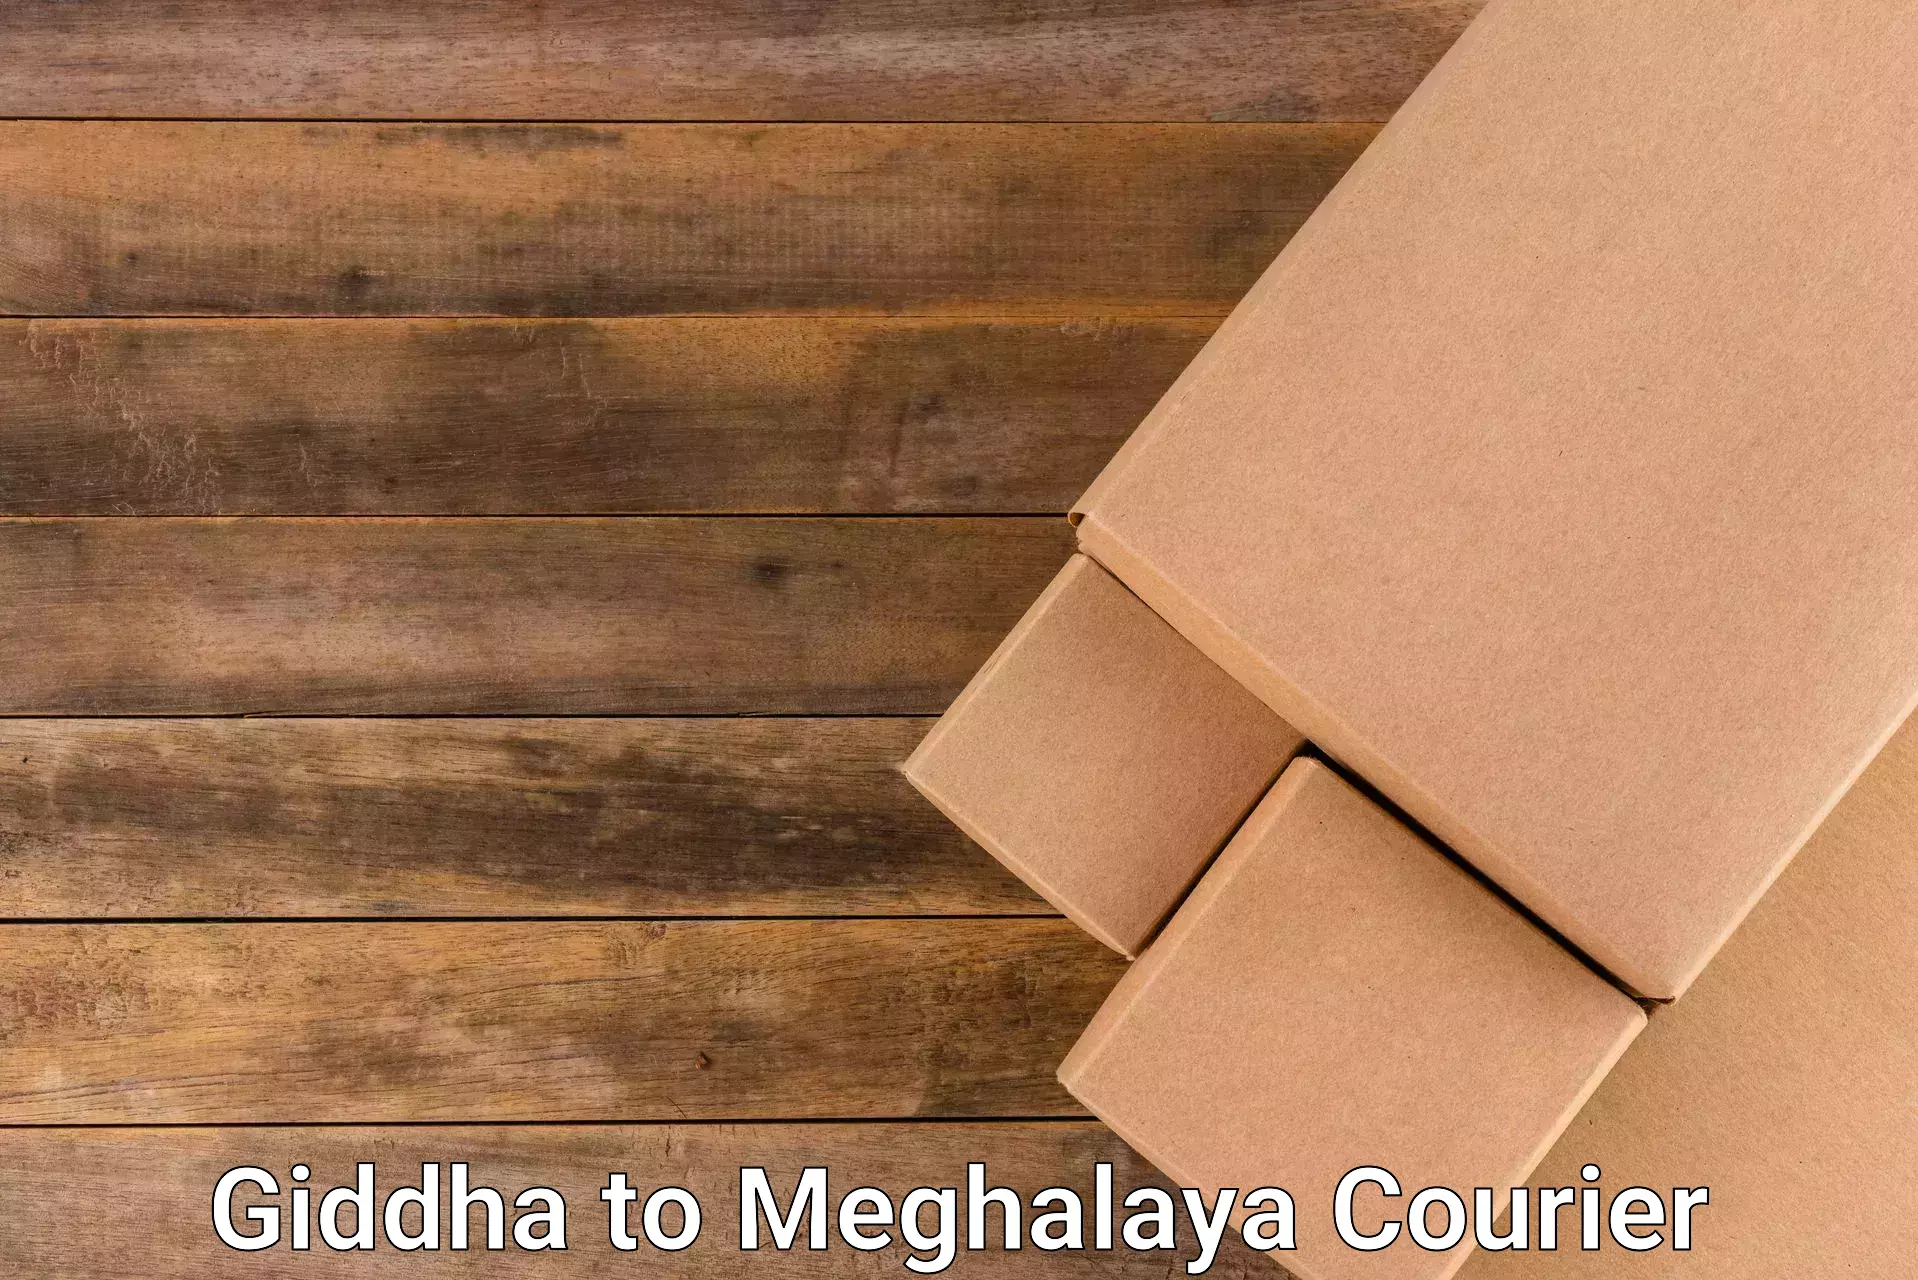 Residential courier service Giddha to Shillong